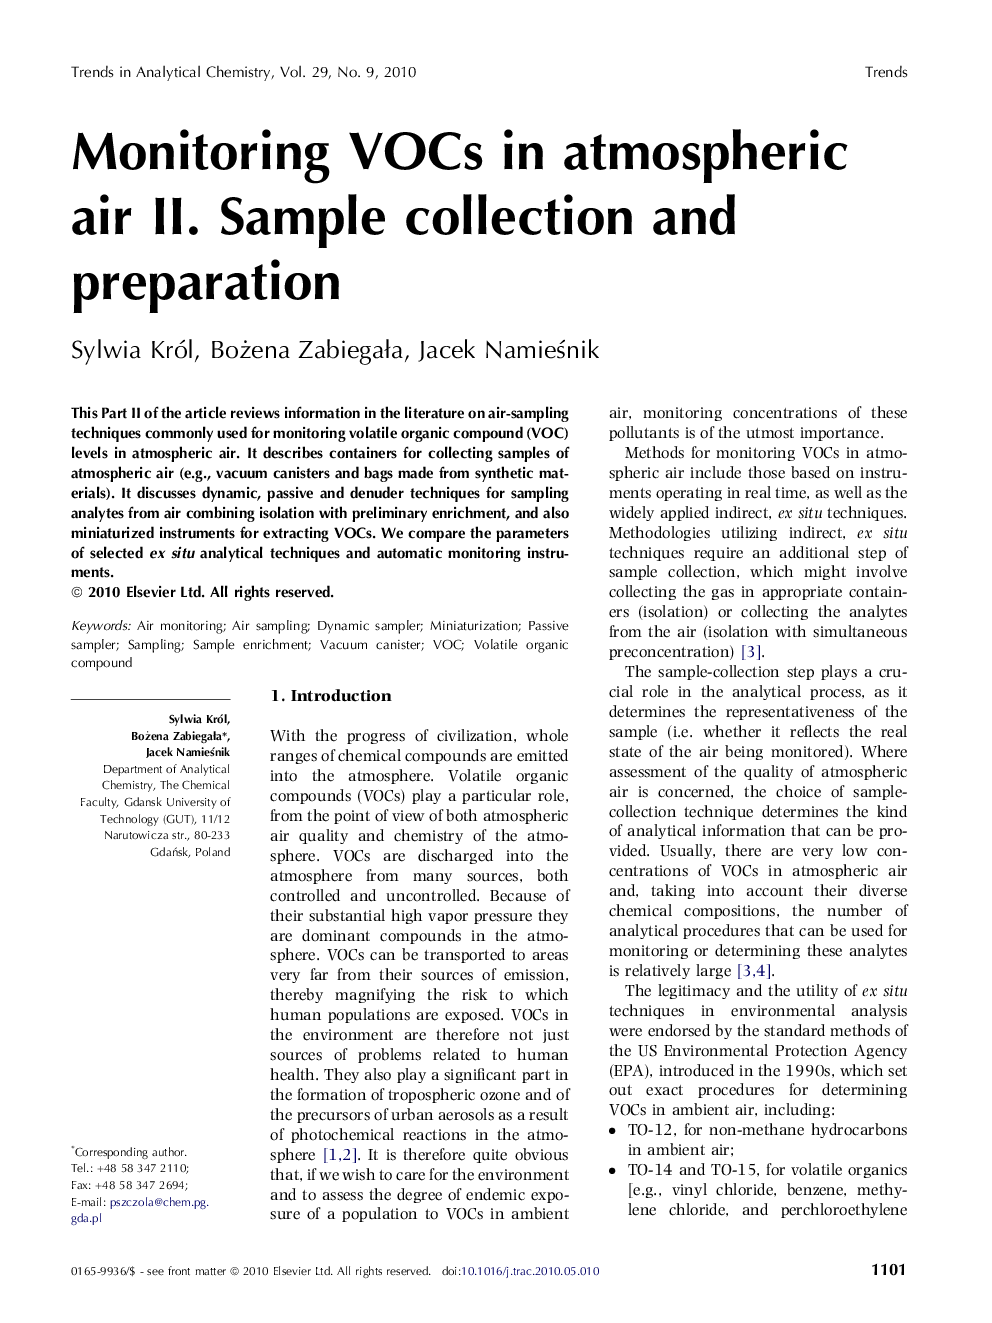 Monitoring VOCs in atmospheric air II. Sample collection and preparation